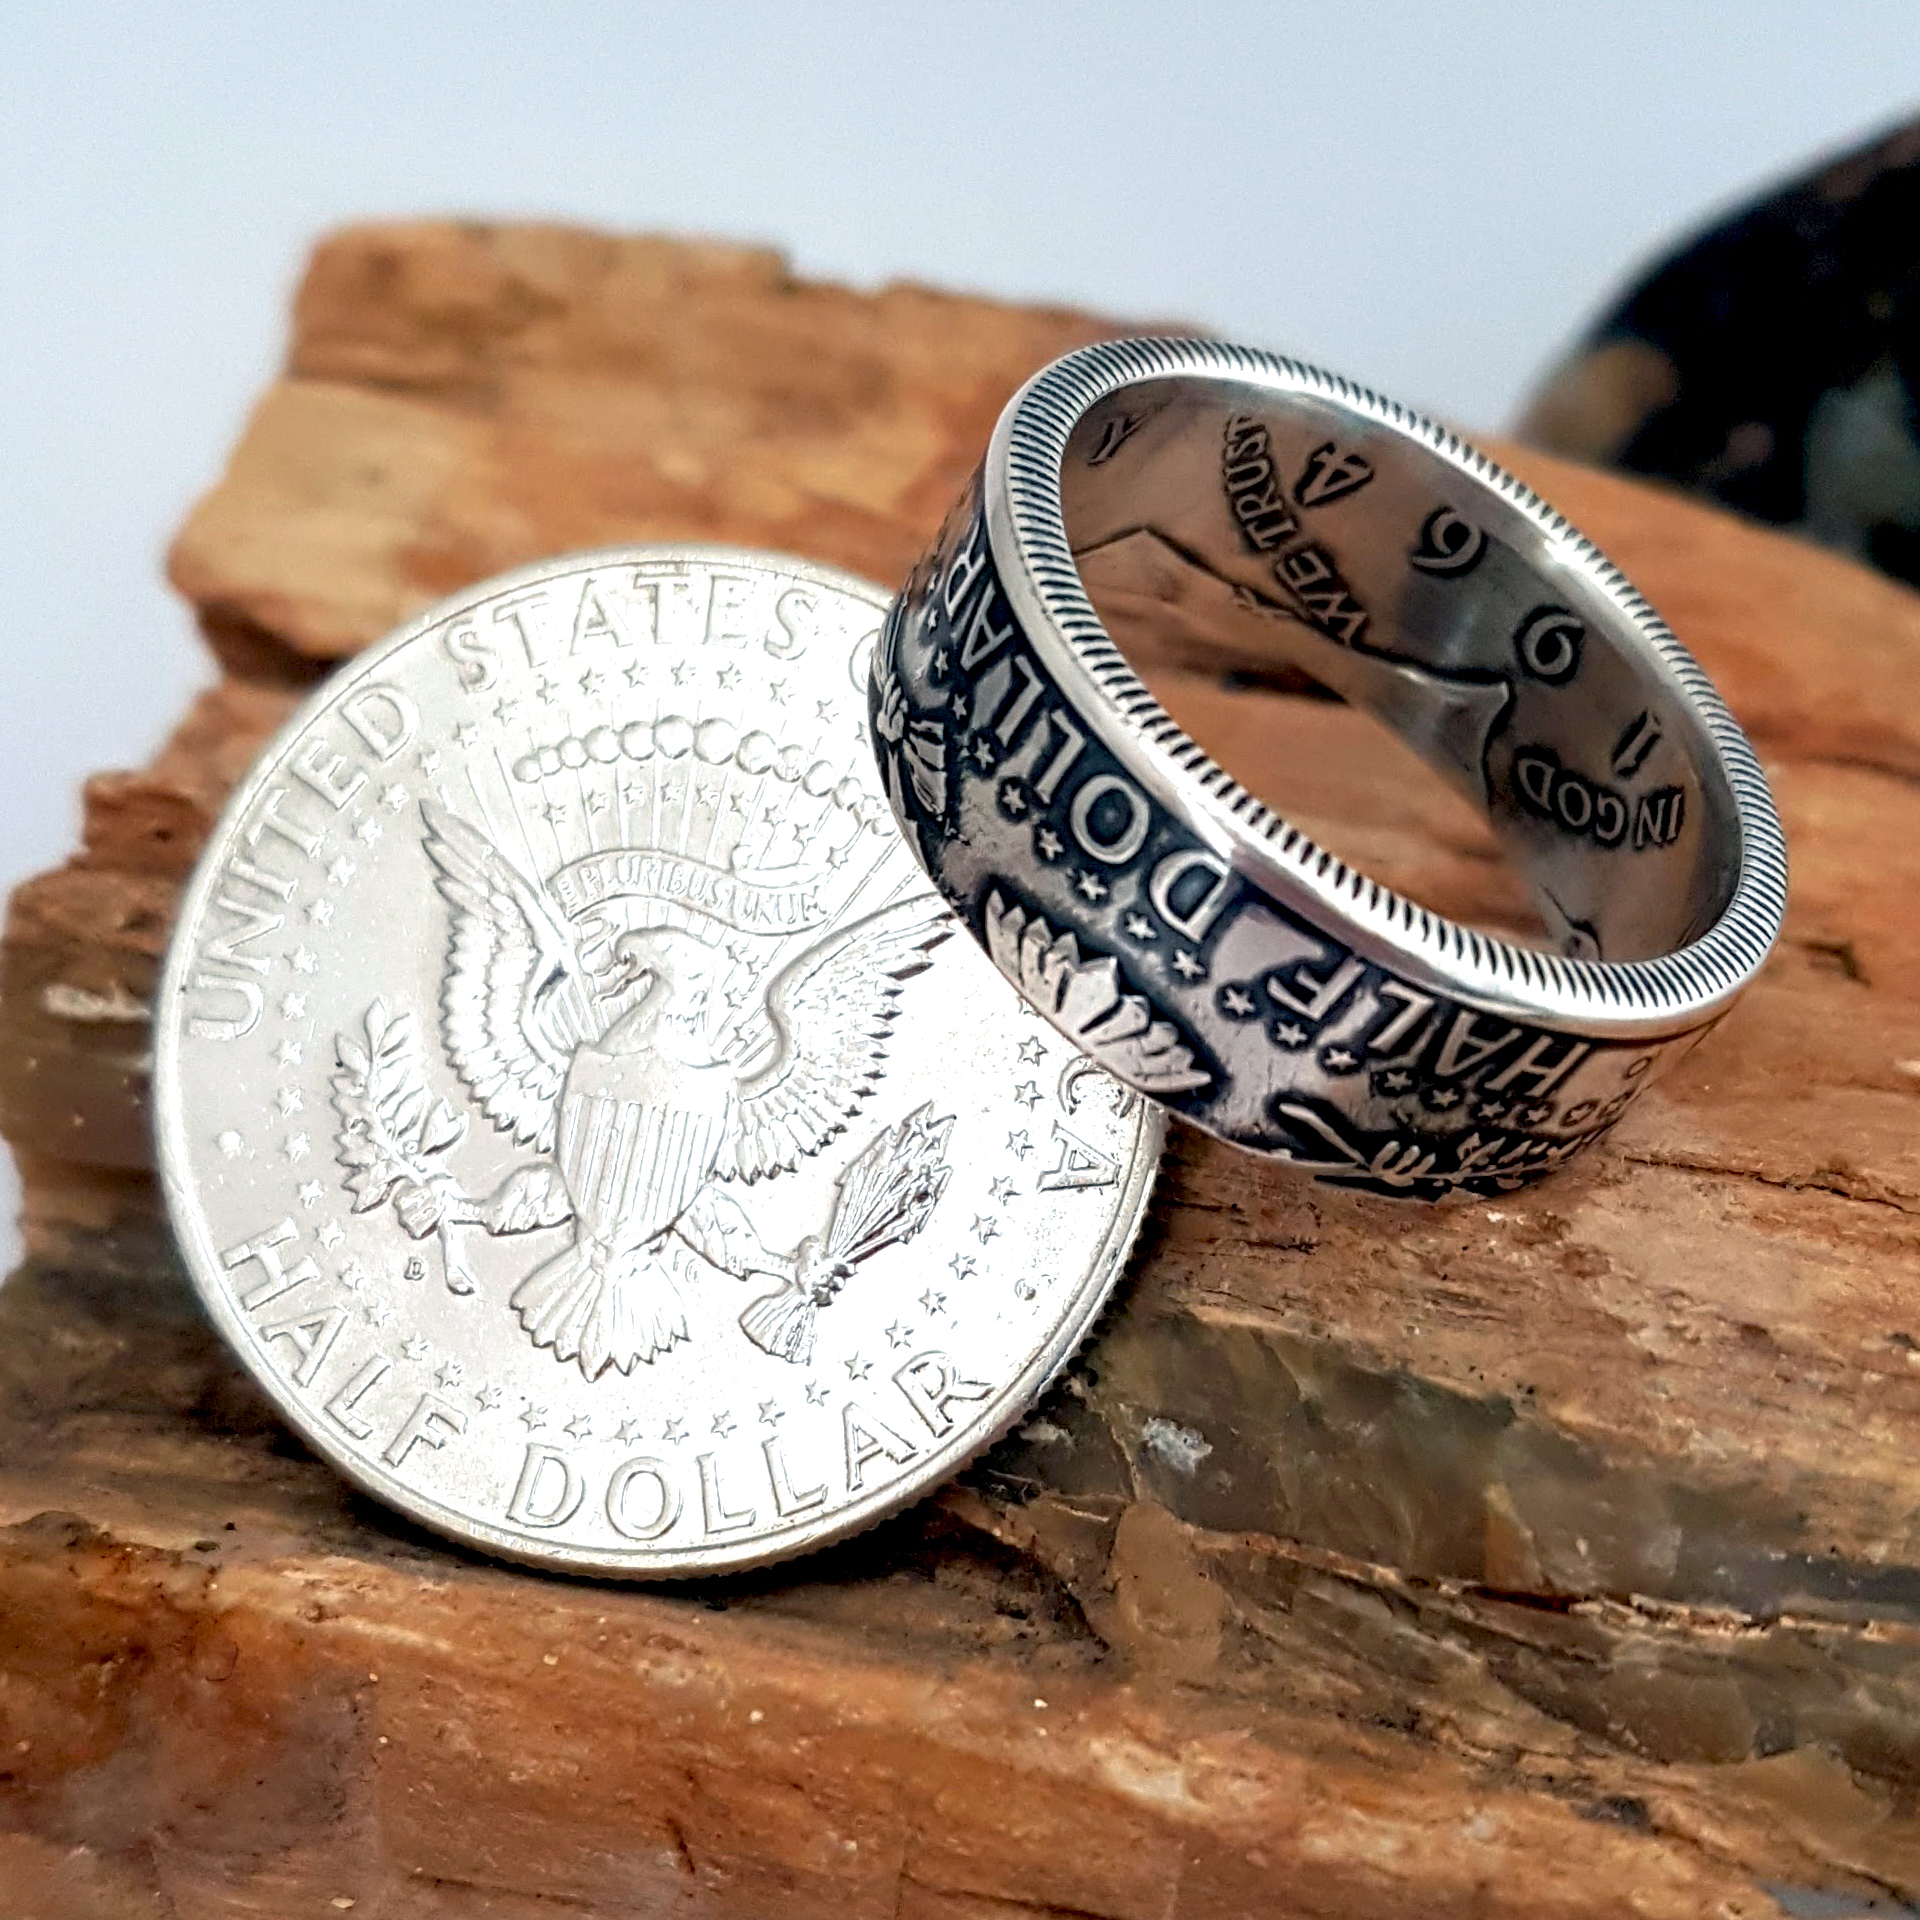 A US coin made into a ring by Celtic Coin Crafts